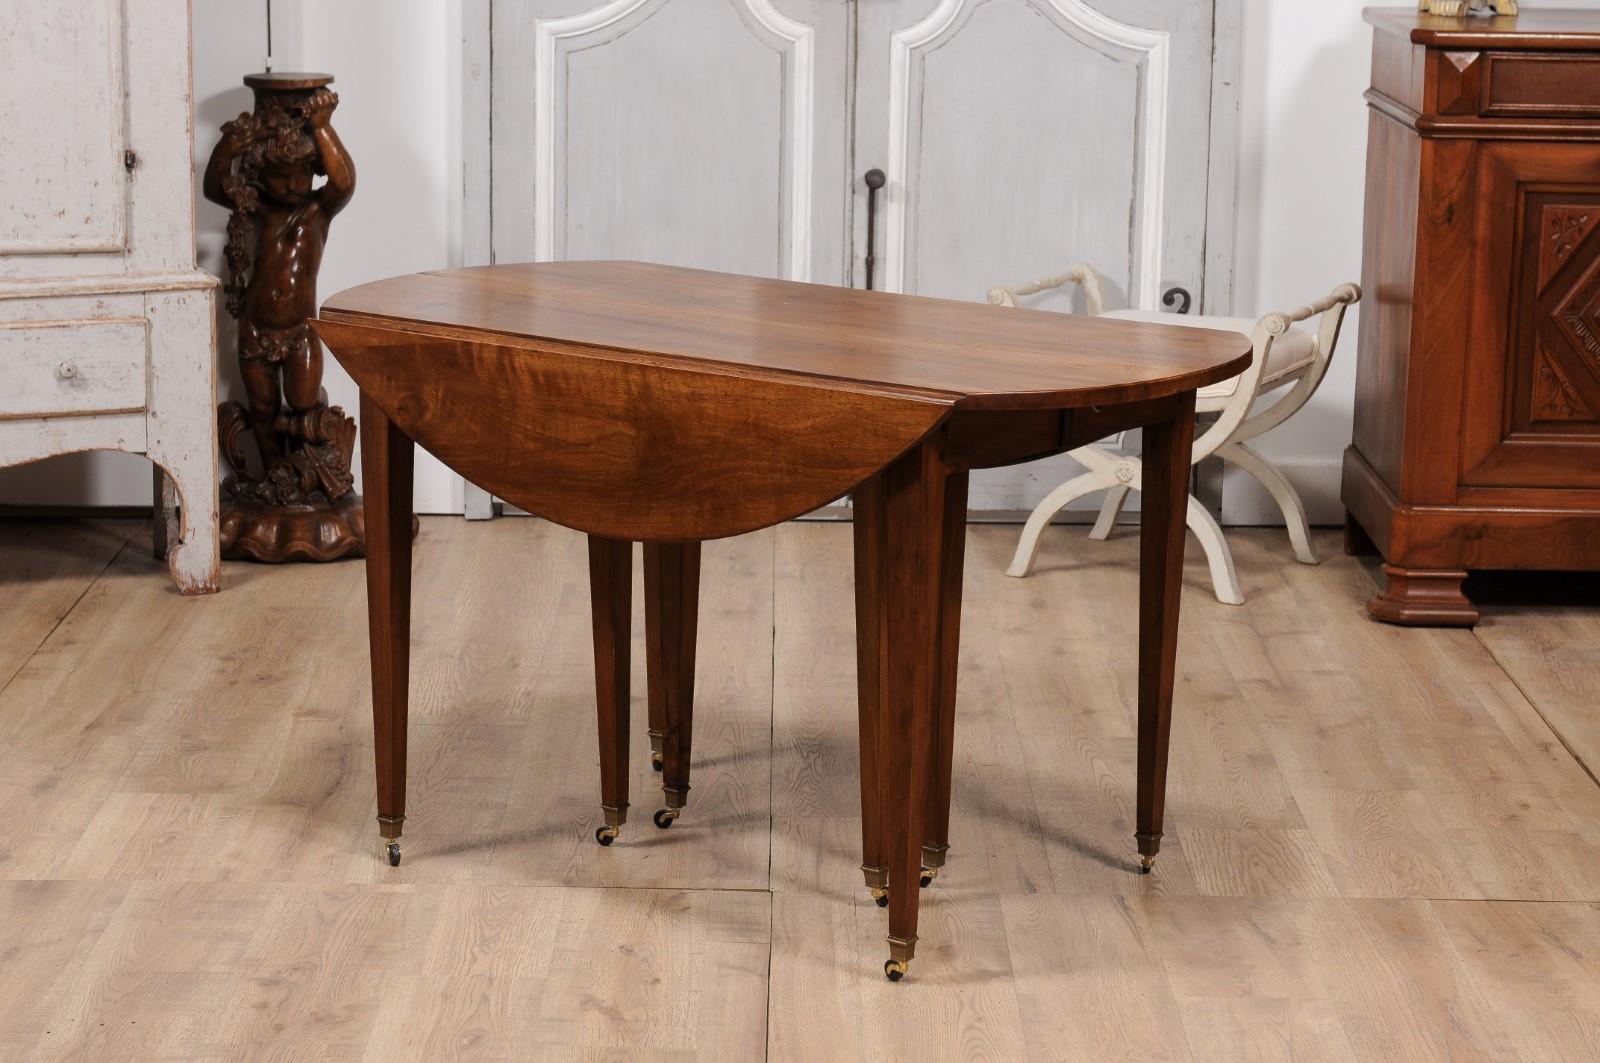 French Turn of the Century Extension Walnut Table With Five Leaves Circa 1900 In Good Condition For Sale In Atlanta, GA